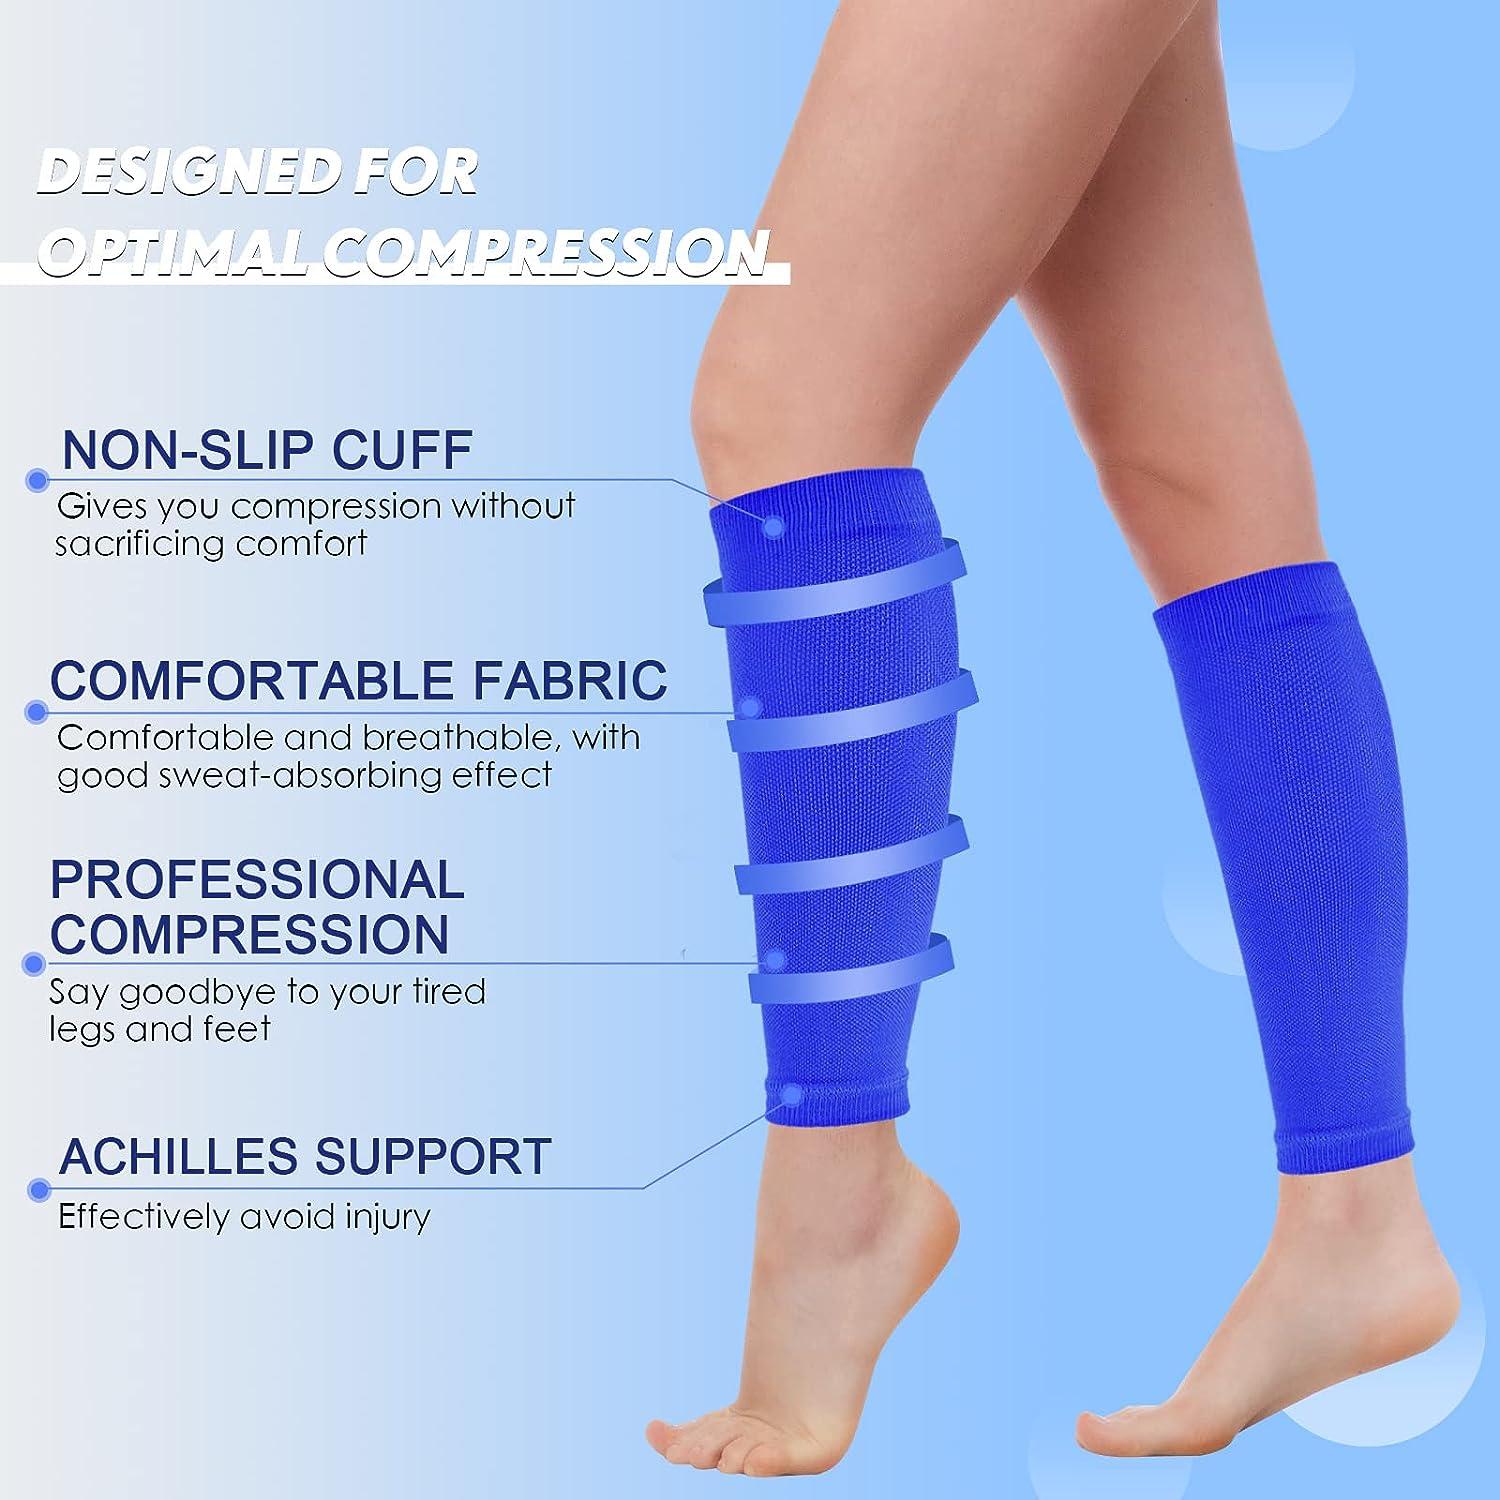 calf compression Sleeves For Men And Women - Leg compression Sleeve -  Footless compression Socks for Runners, Shin Splints, Varicose Vein & calf  Pain Relief - calf Brace For Running, cycling 